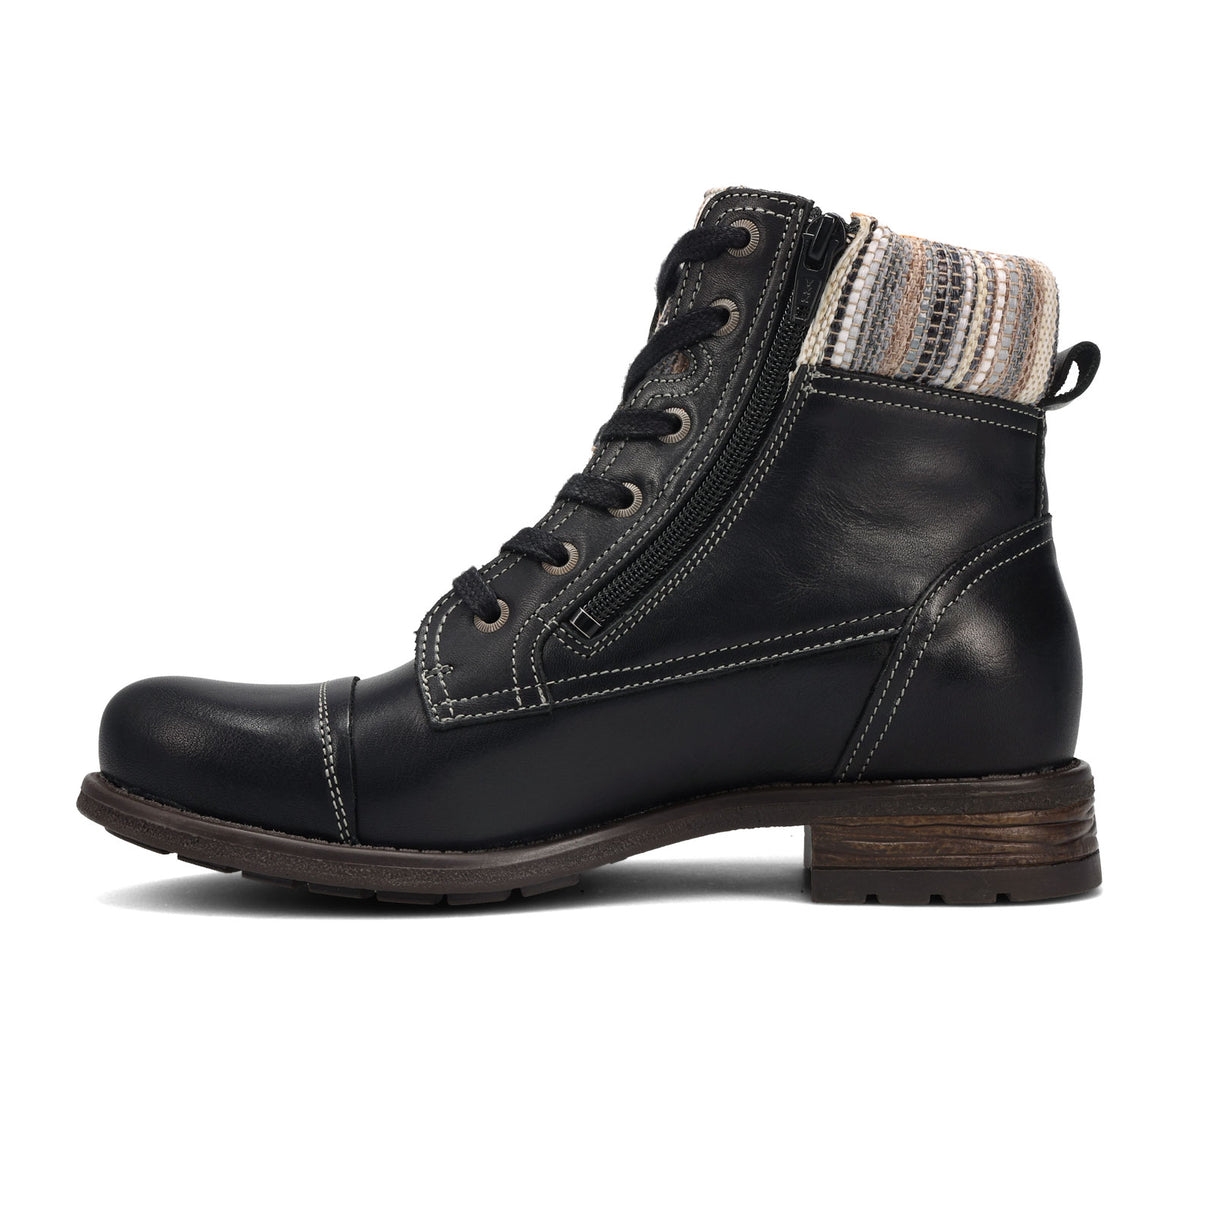 Taos Captain Ankle Boot (Women) - Black Boots - Fashion - Mid Boot - The Heel Shoe Fitters